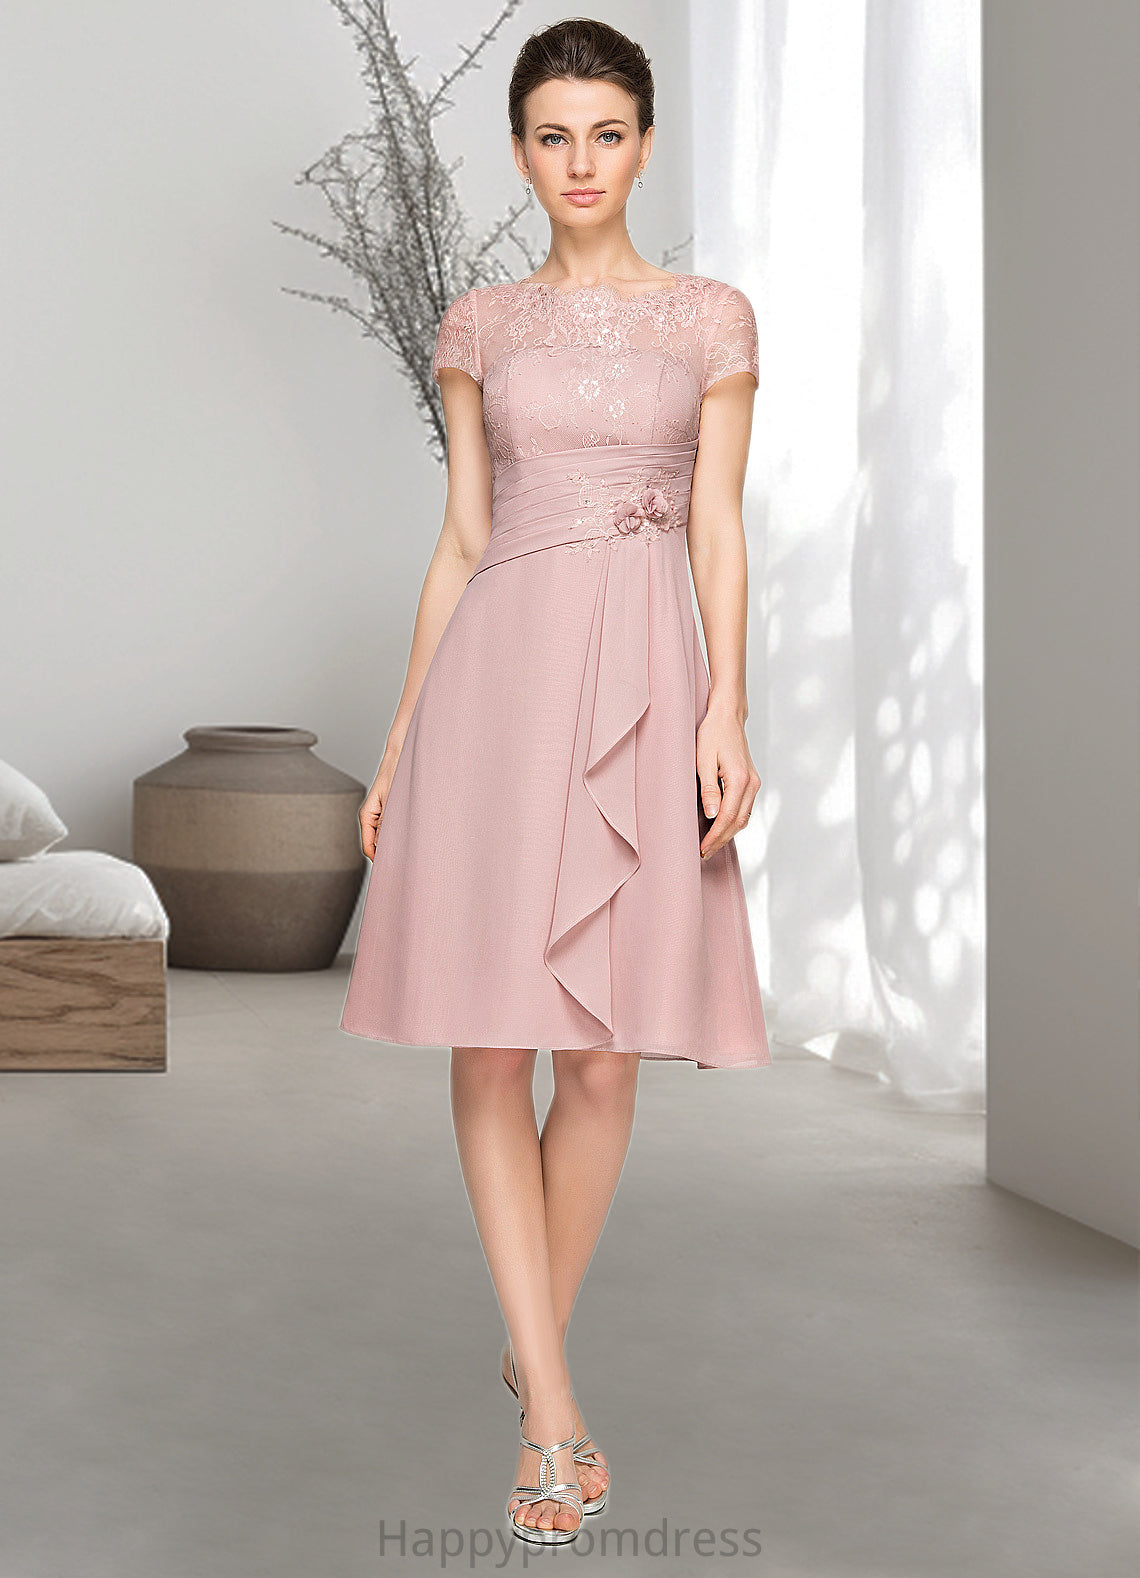 Grace A-Line Scoop Neck Knee-Length Chiffon Lace Mother of the Bride Dress With Beading Flower(s) Sequins Cascading Ruffles XXS126P0014704